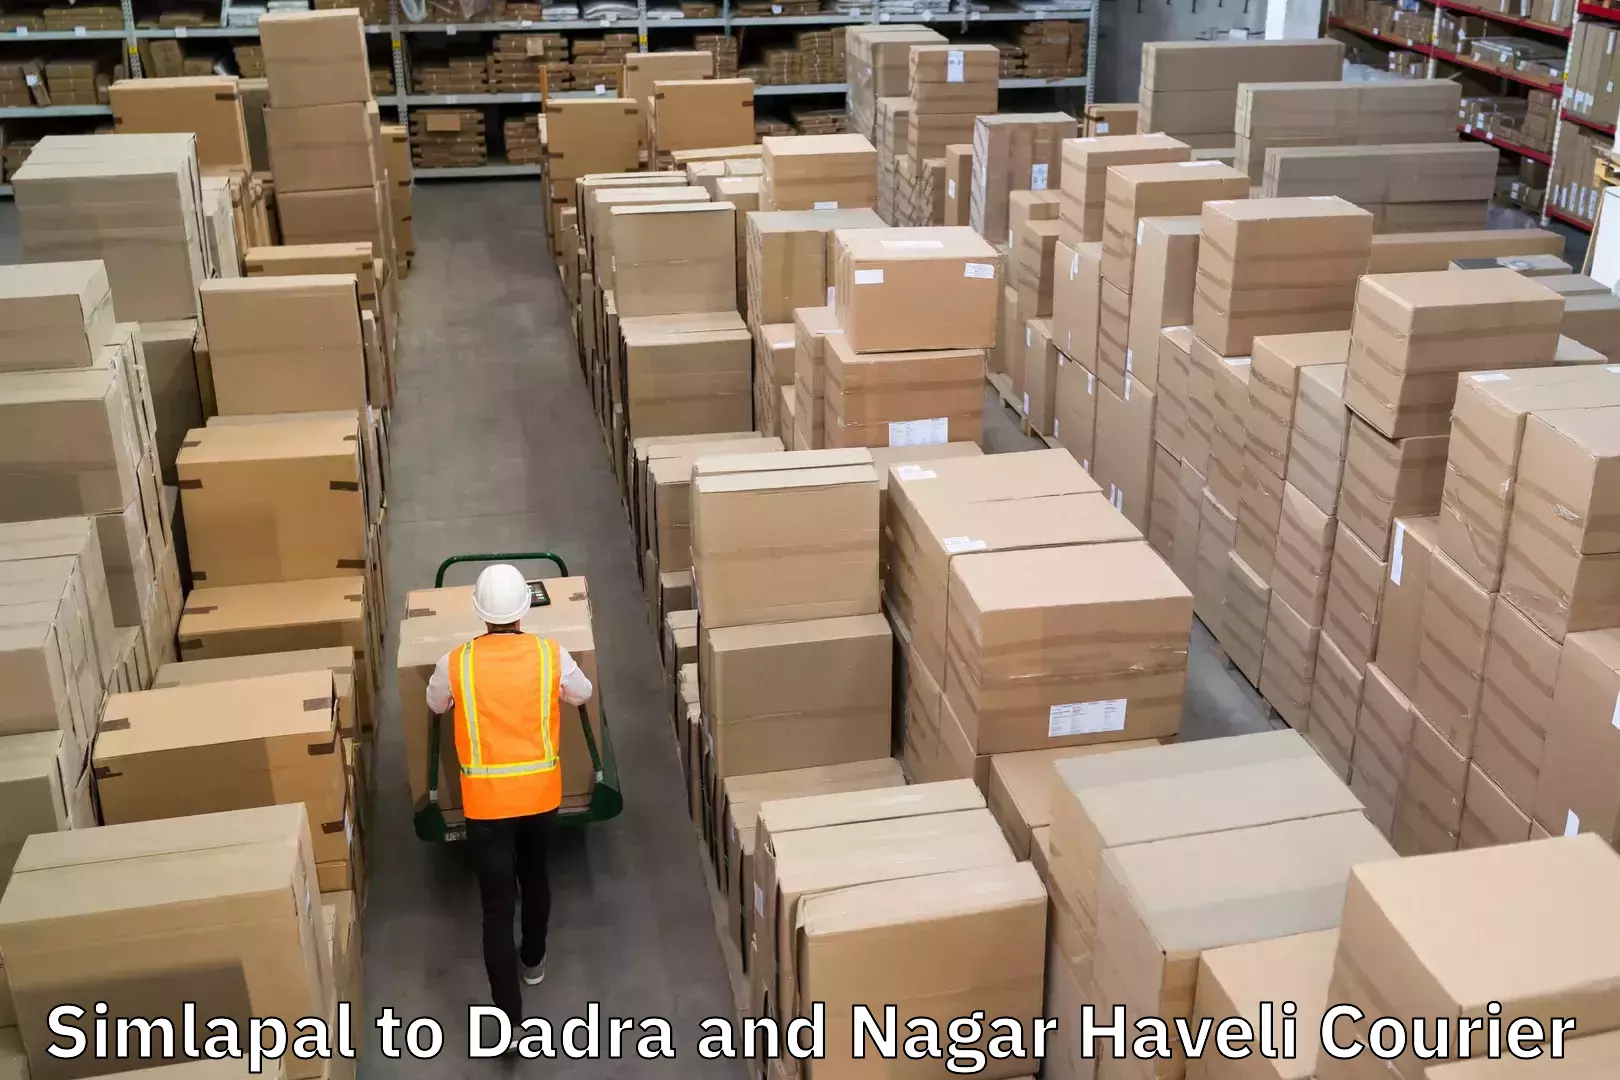 Courier dispatch services Simlapal to Dadra and Nagar Haveli